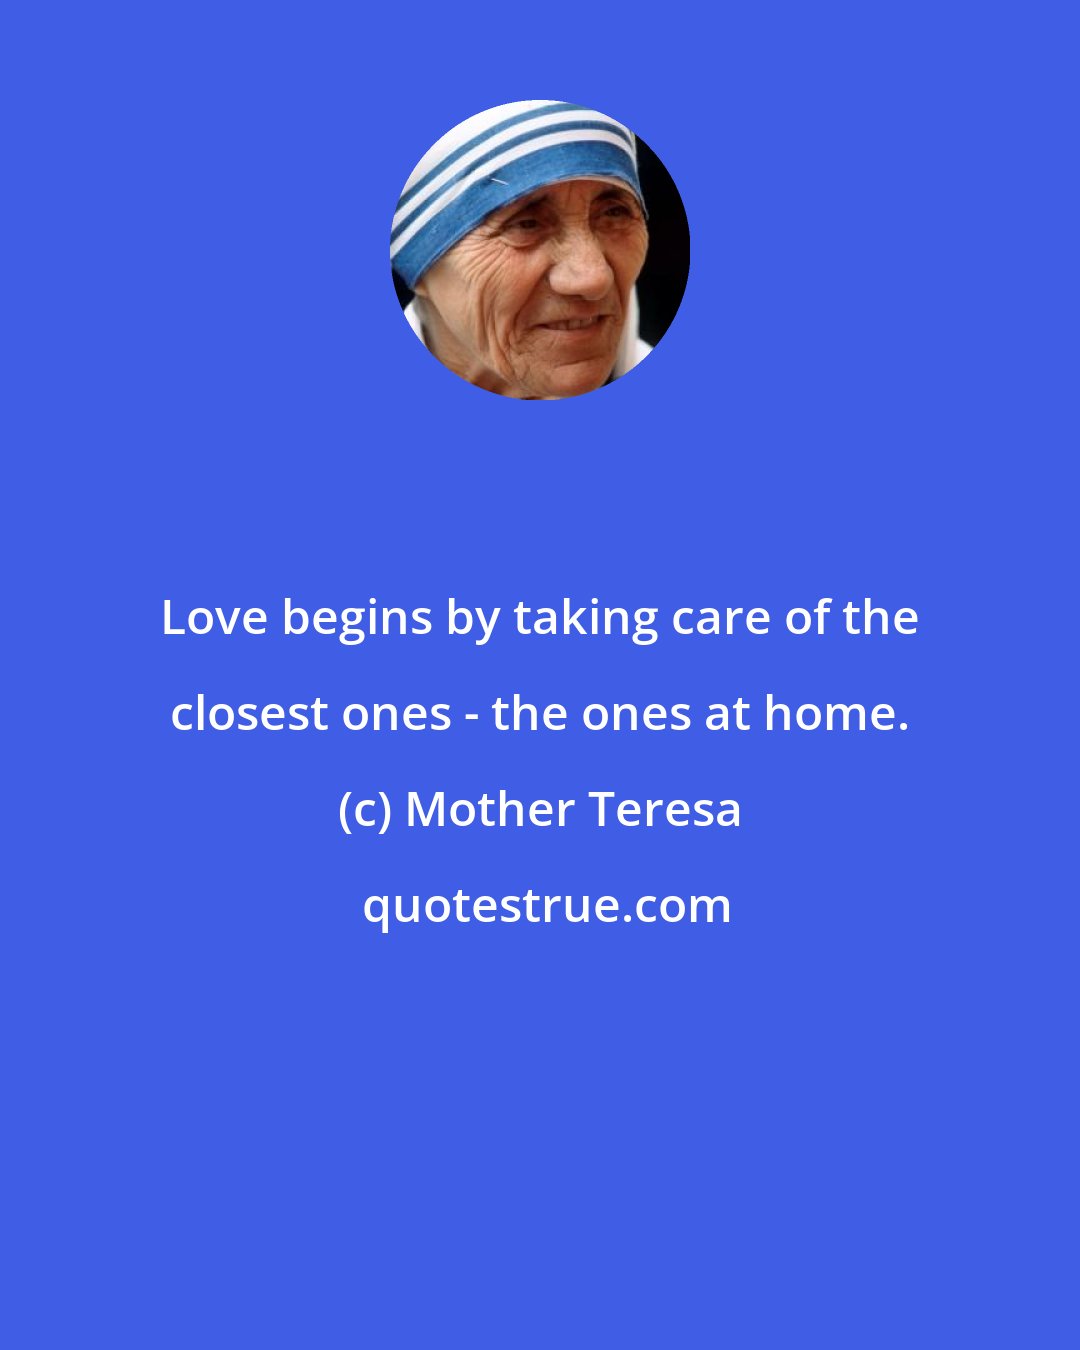 Mother Teresa: Love begins by taking care of the closest ones - the ones at home.